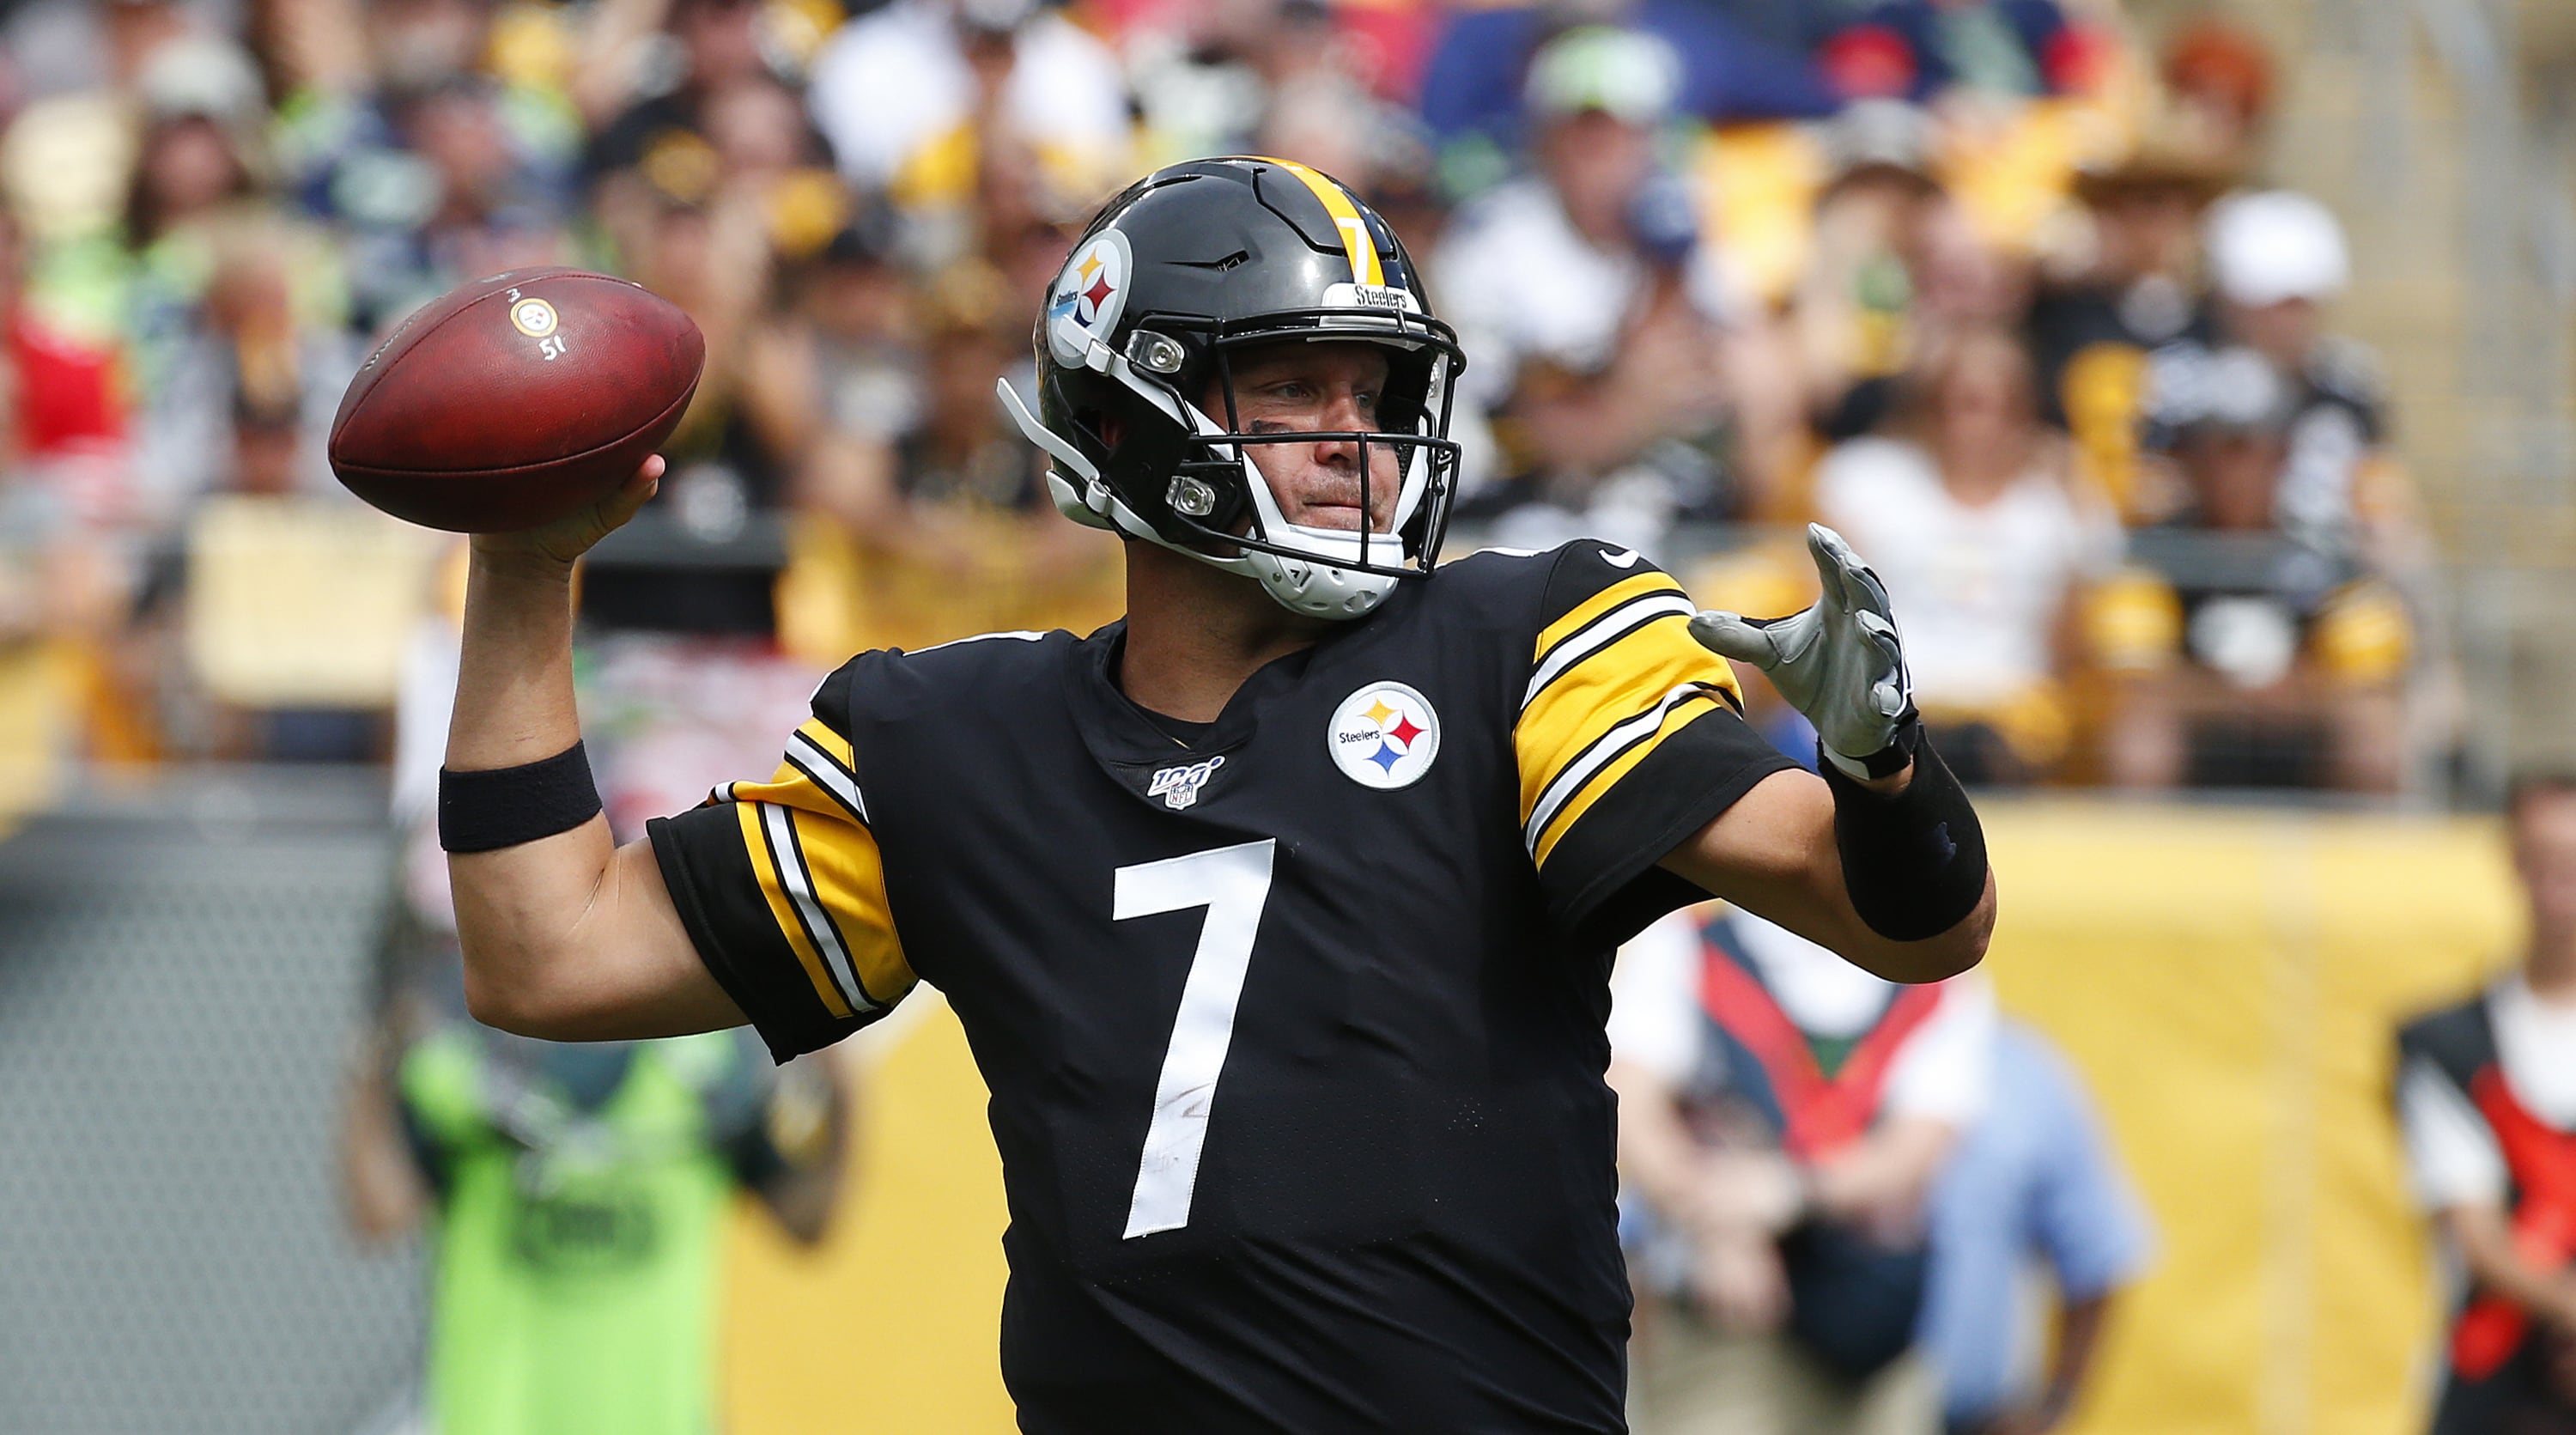 PITTSBURGH, PA - SEPTEMBER 15:  Ben Roethlisberger #7 of the Pittsburgh Steelers in action against the Seattle Seahawks on September 15, 2019 at Heinz Field in Pittsburgh, Pennsylvania.  (Photo by Justin K. Aller/Getty Images)